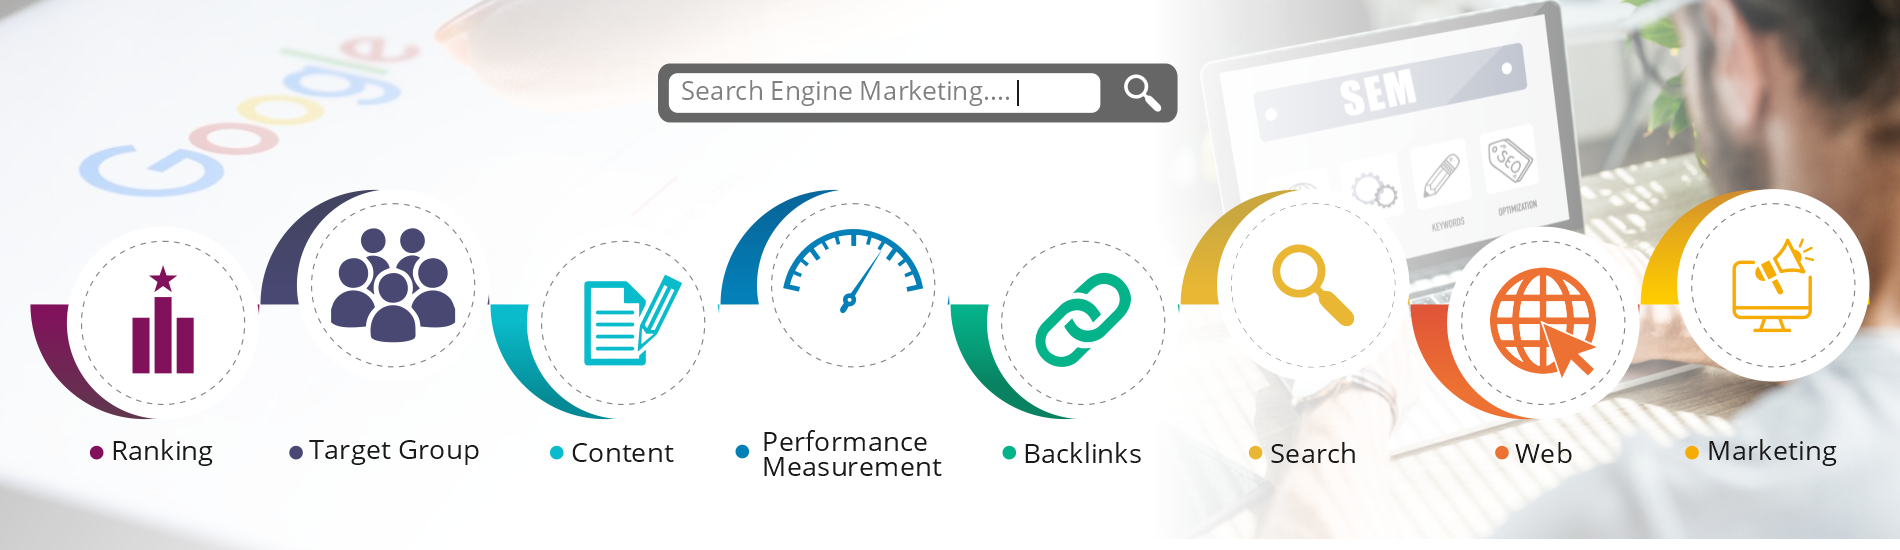 Search Engine Marketing Services by VLC Solutions